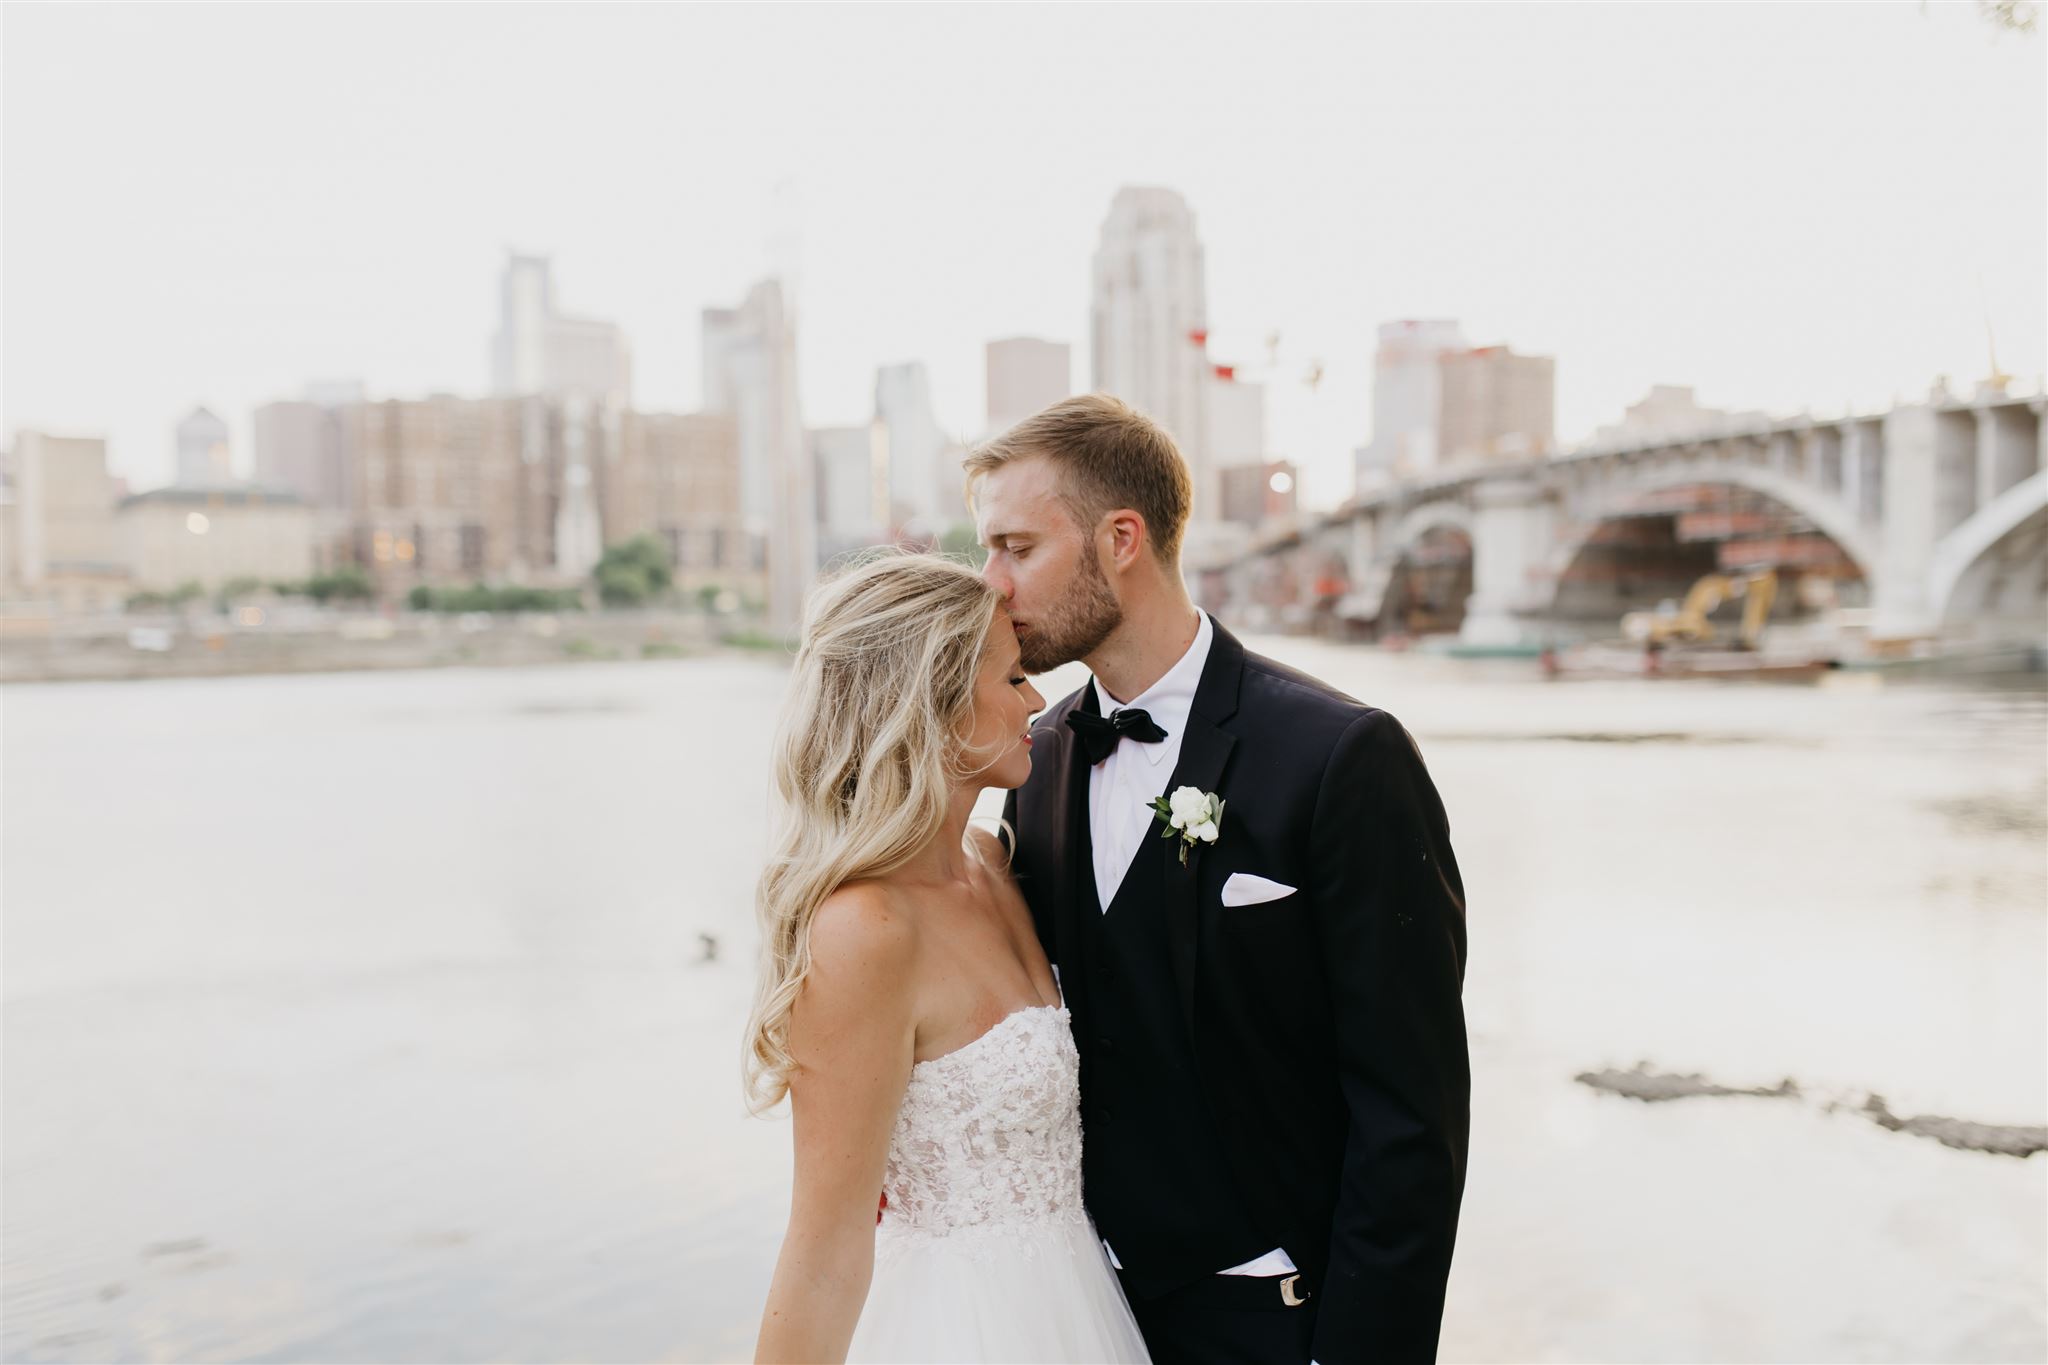 Bride and groom photo shoot in Minnesota during their wedding day